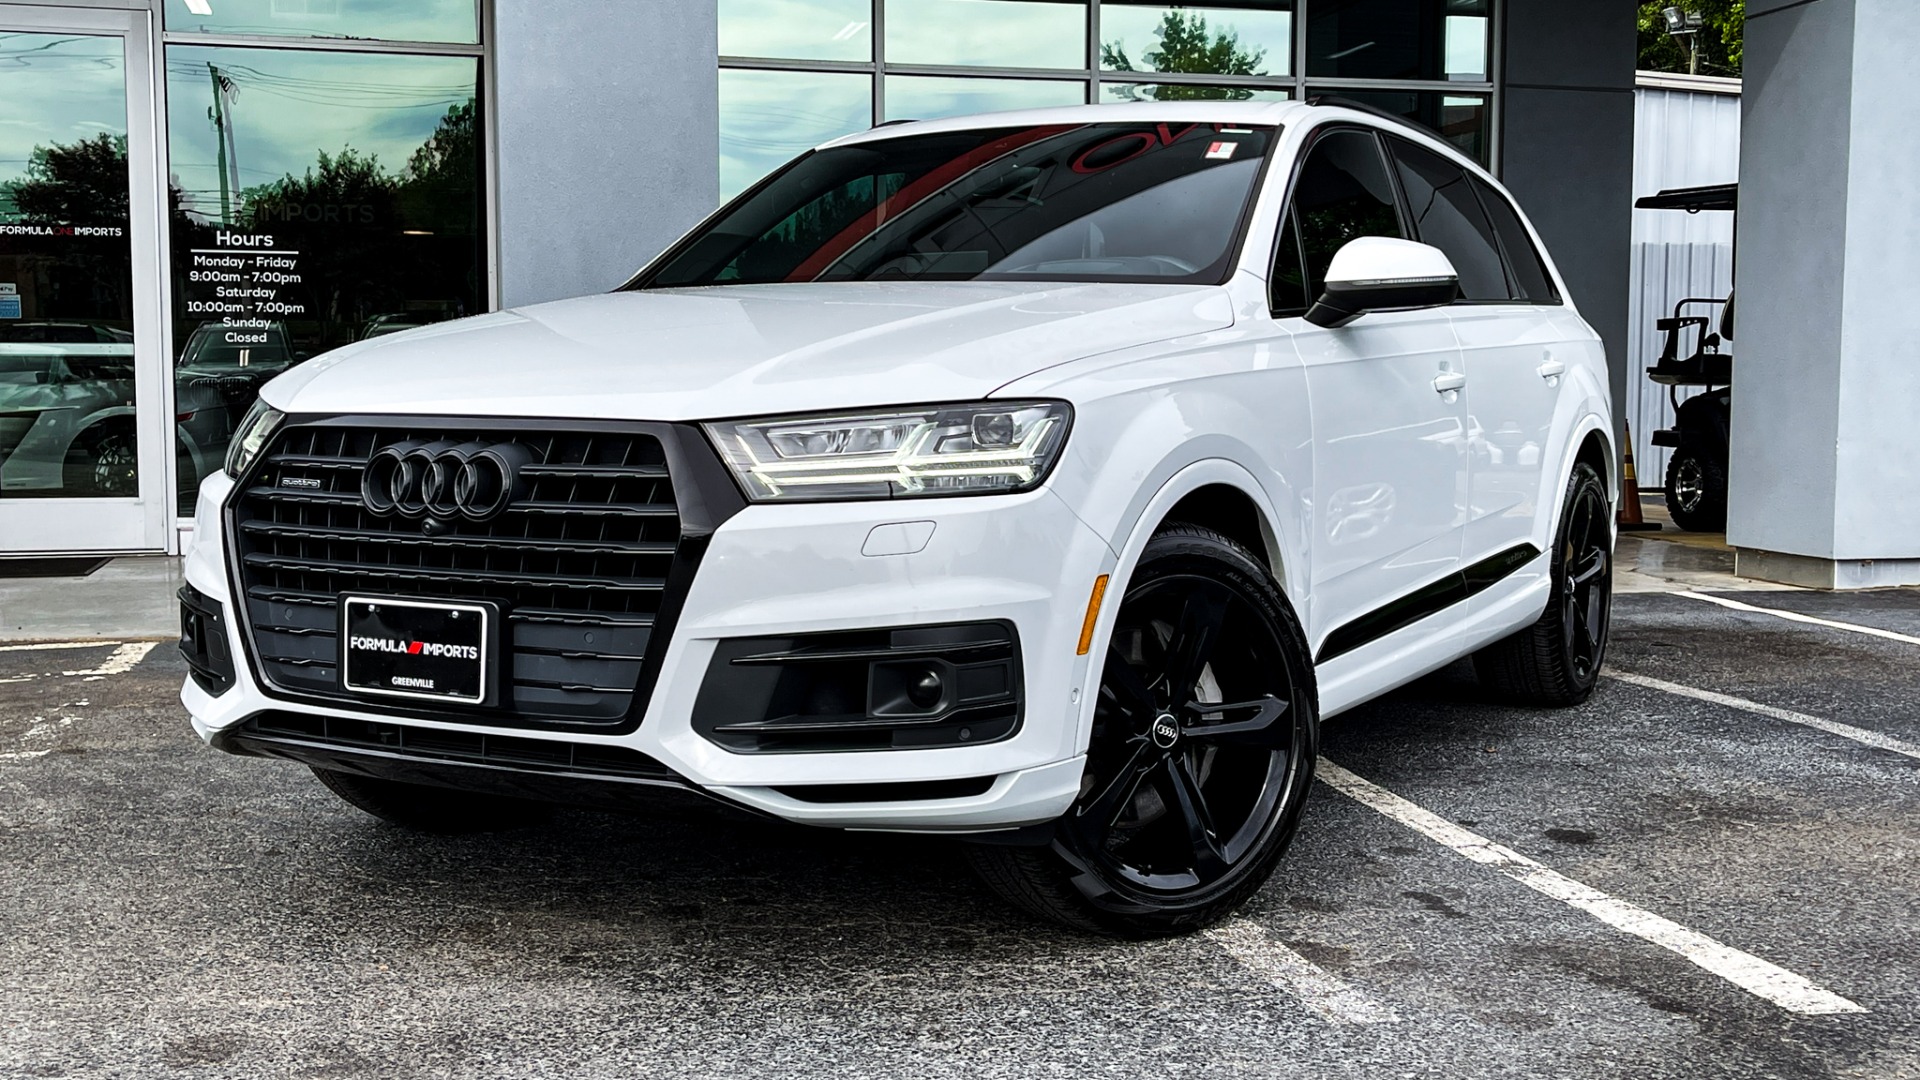 Used 2019 Audi Q7 PRESTIGE / NAV / SUNROOF / LANE ASST / TOWING / 21-IN WHLS / REA for sale $60,995 at Formula Imports in Charlotte NC 28227 1